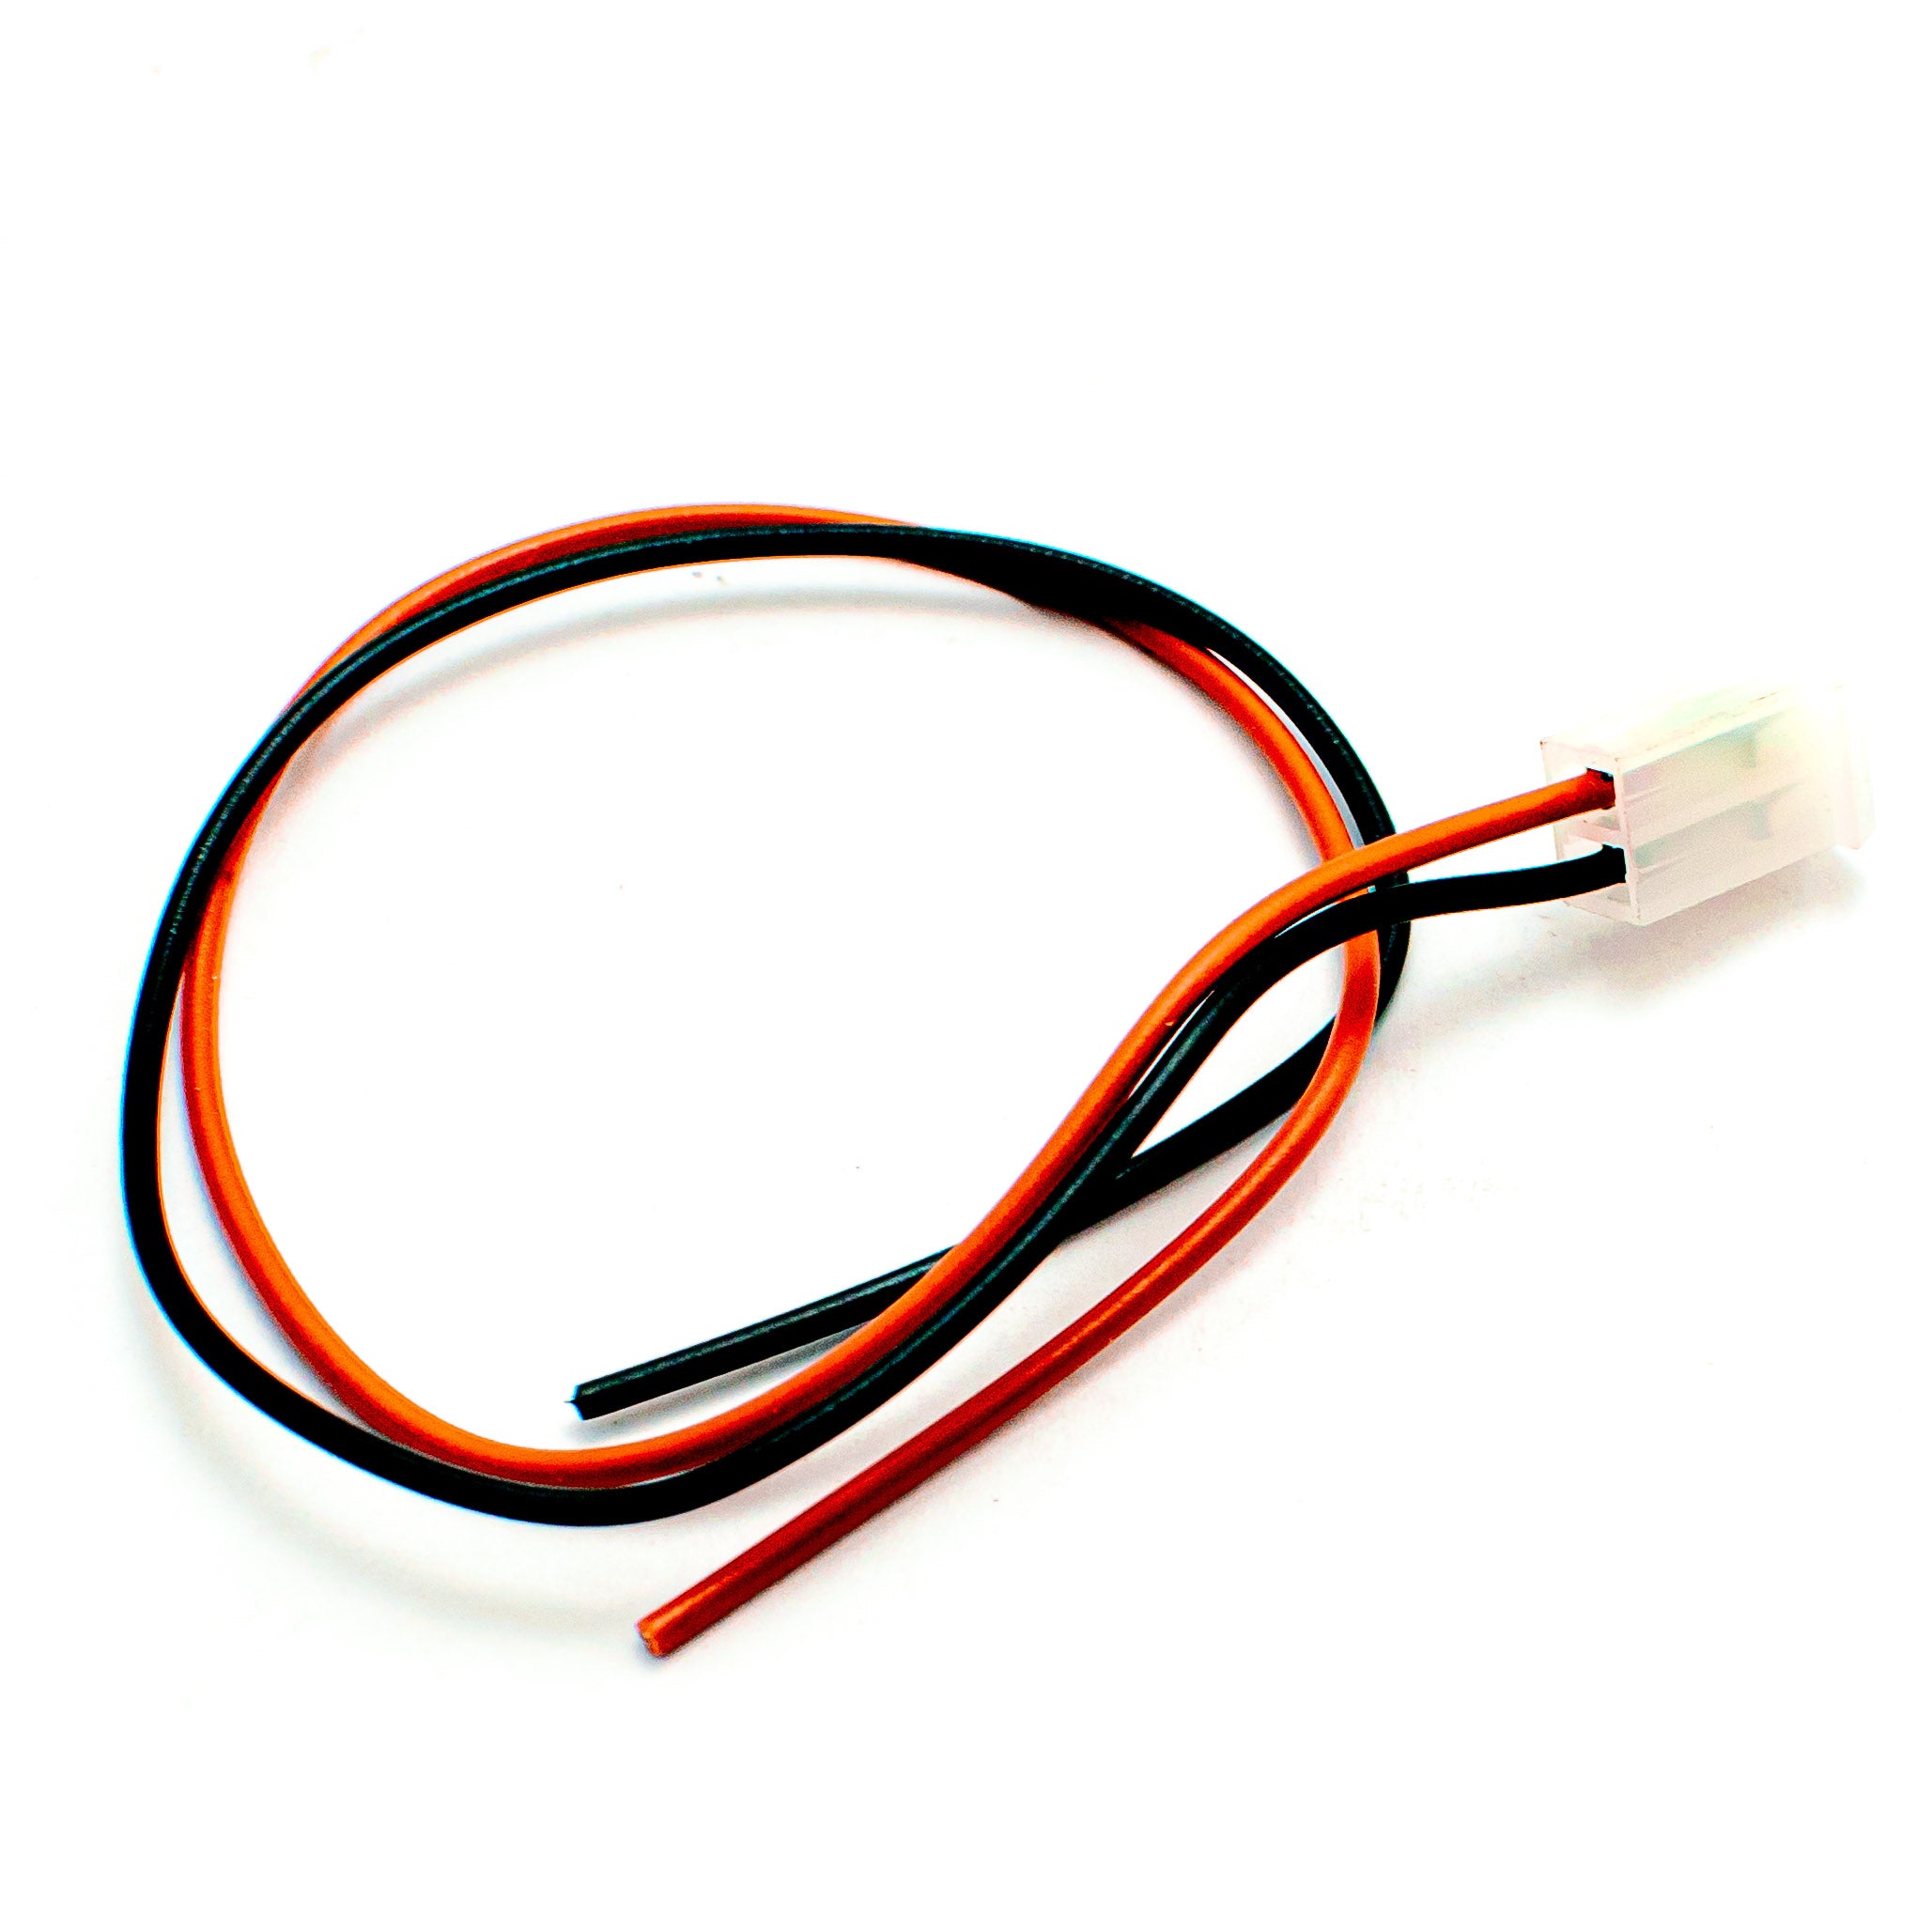 Buy Molex Connector Pins online in India at low cost